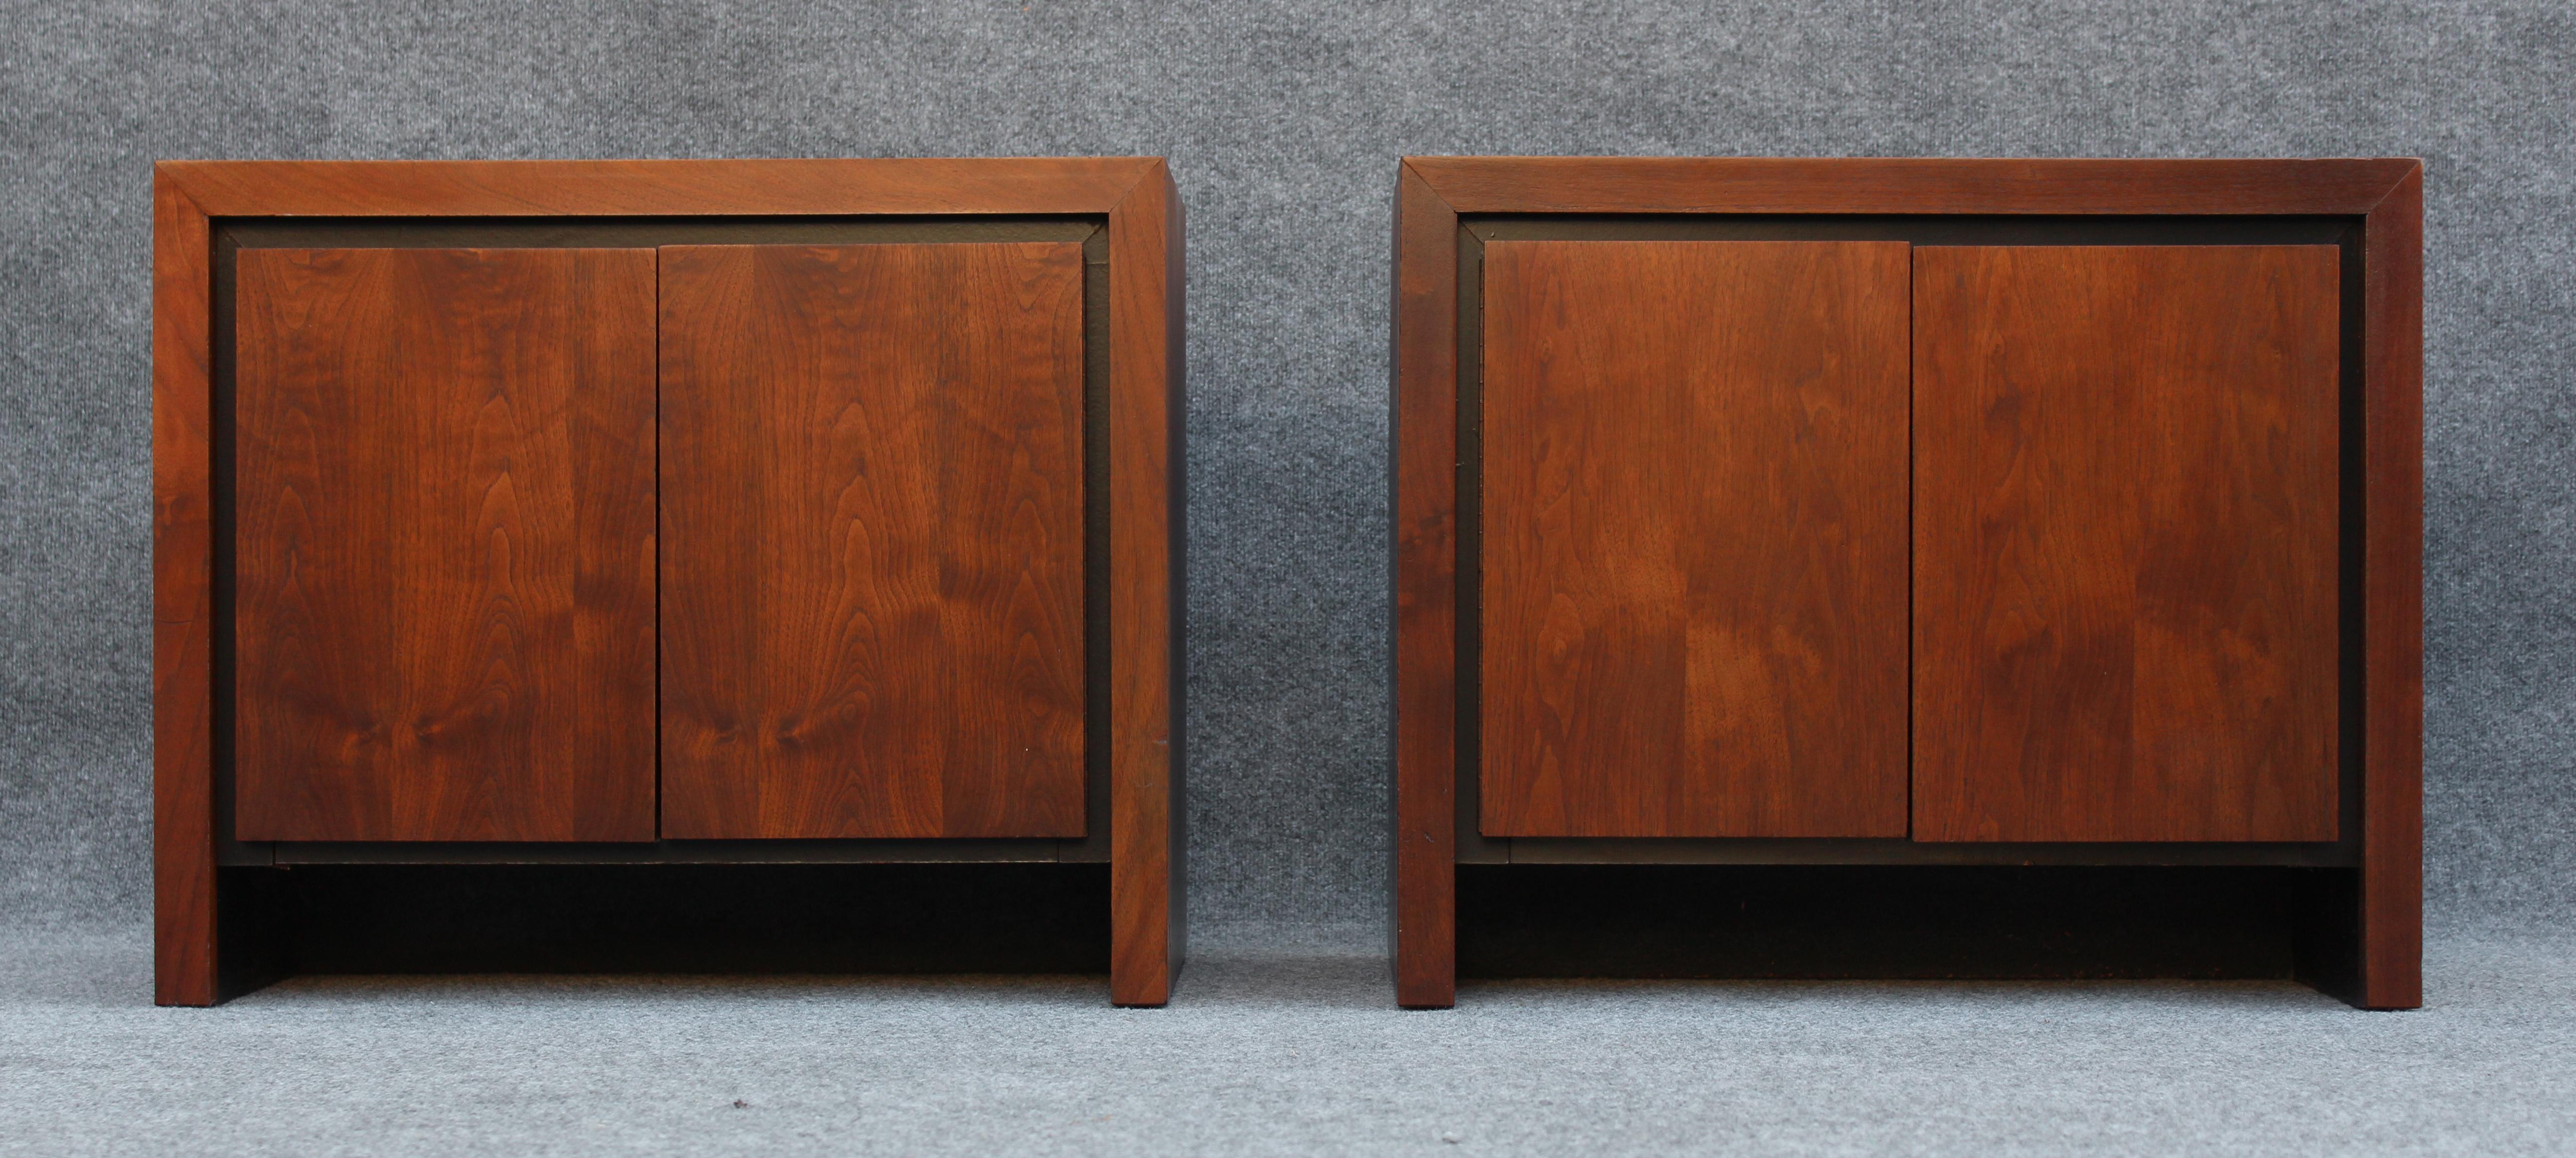 Mid-Century Modern Pair of Dillingham Nightstands or End Tables in Bookmatched Walnut For Sale